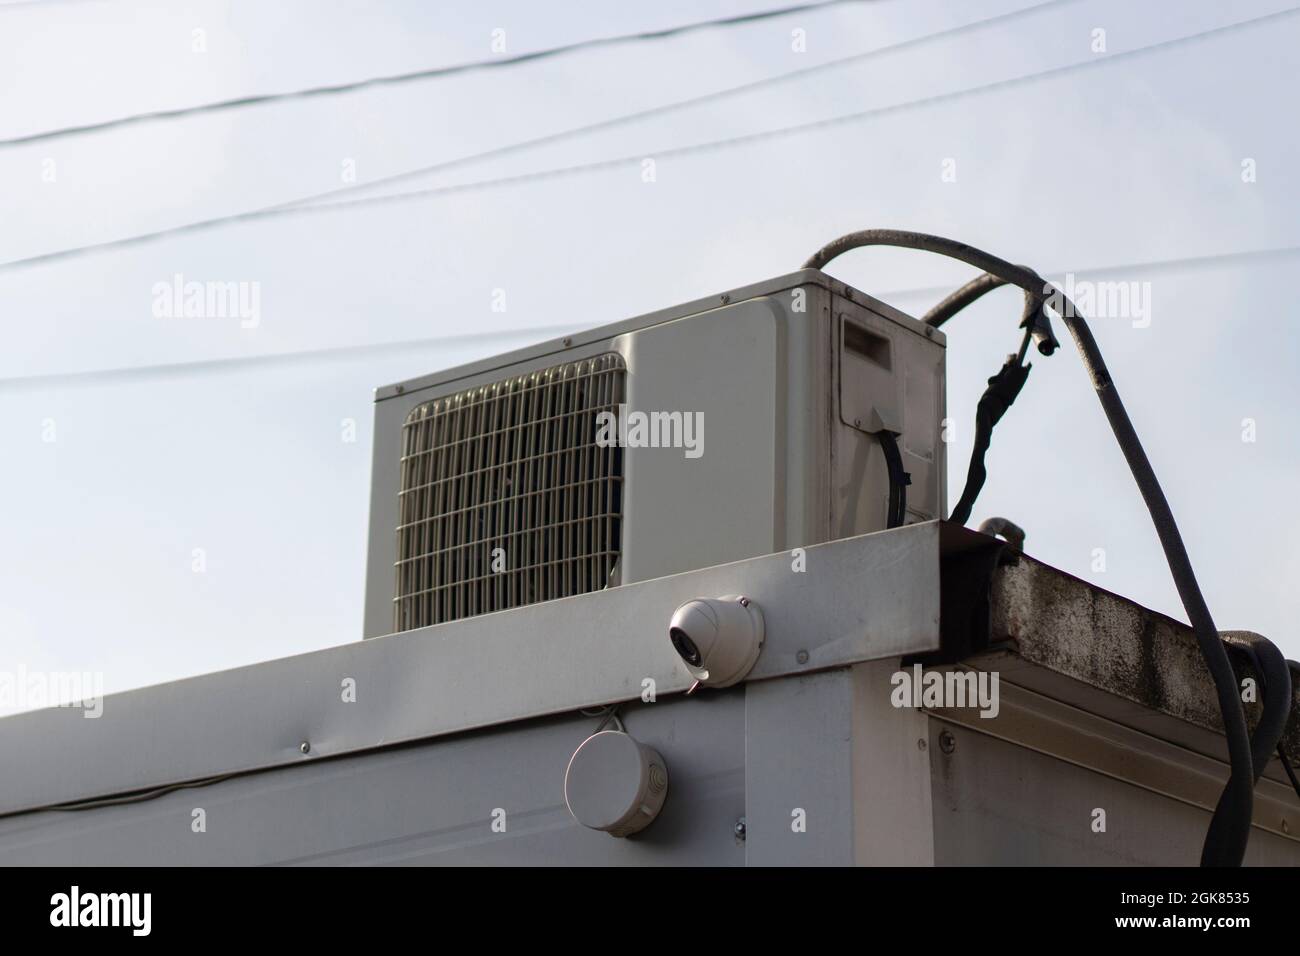 Air conditioning on the roof. The cooling system outside the store. Air conditioning on a hot day. Stock Photo